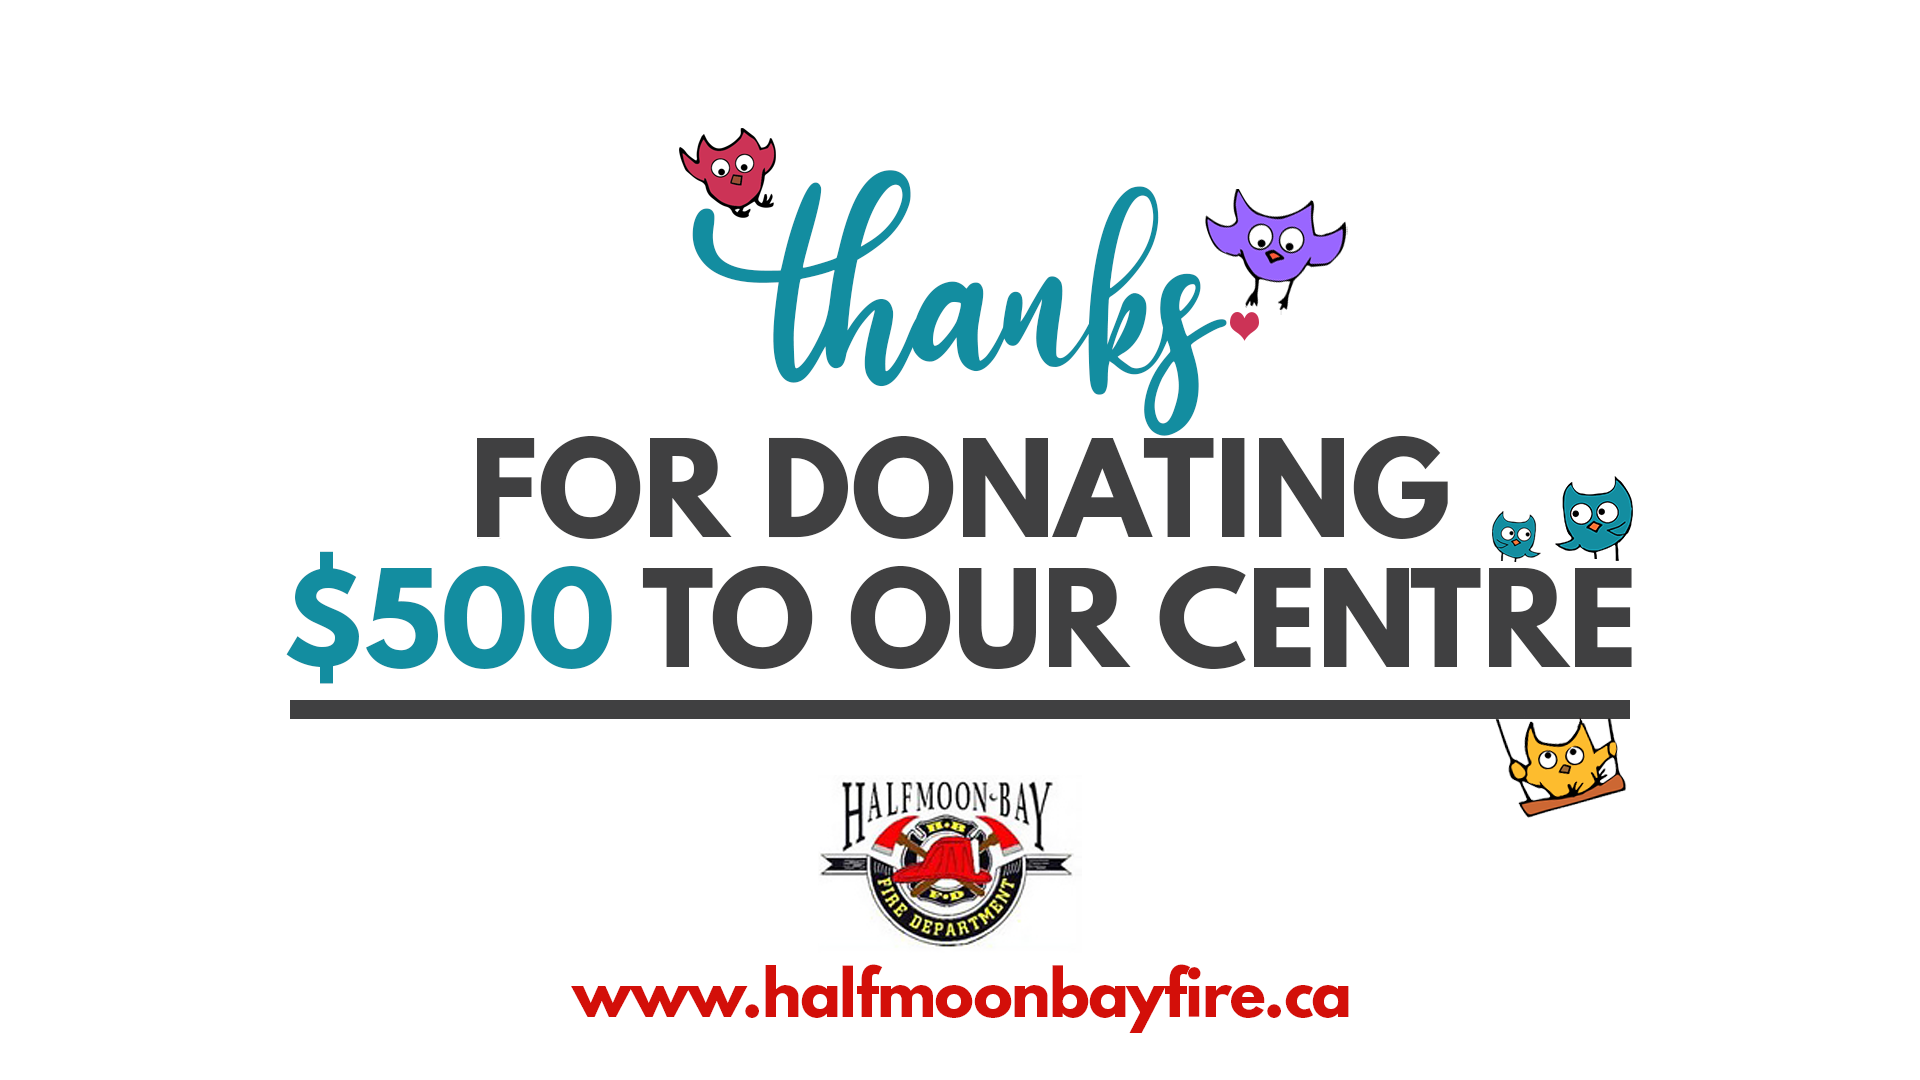 The HMB Fire Department donated to the kids at the Halfmoon Bay Childcare Centre